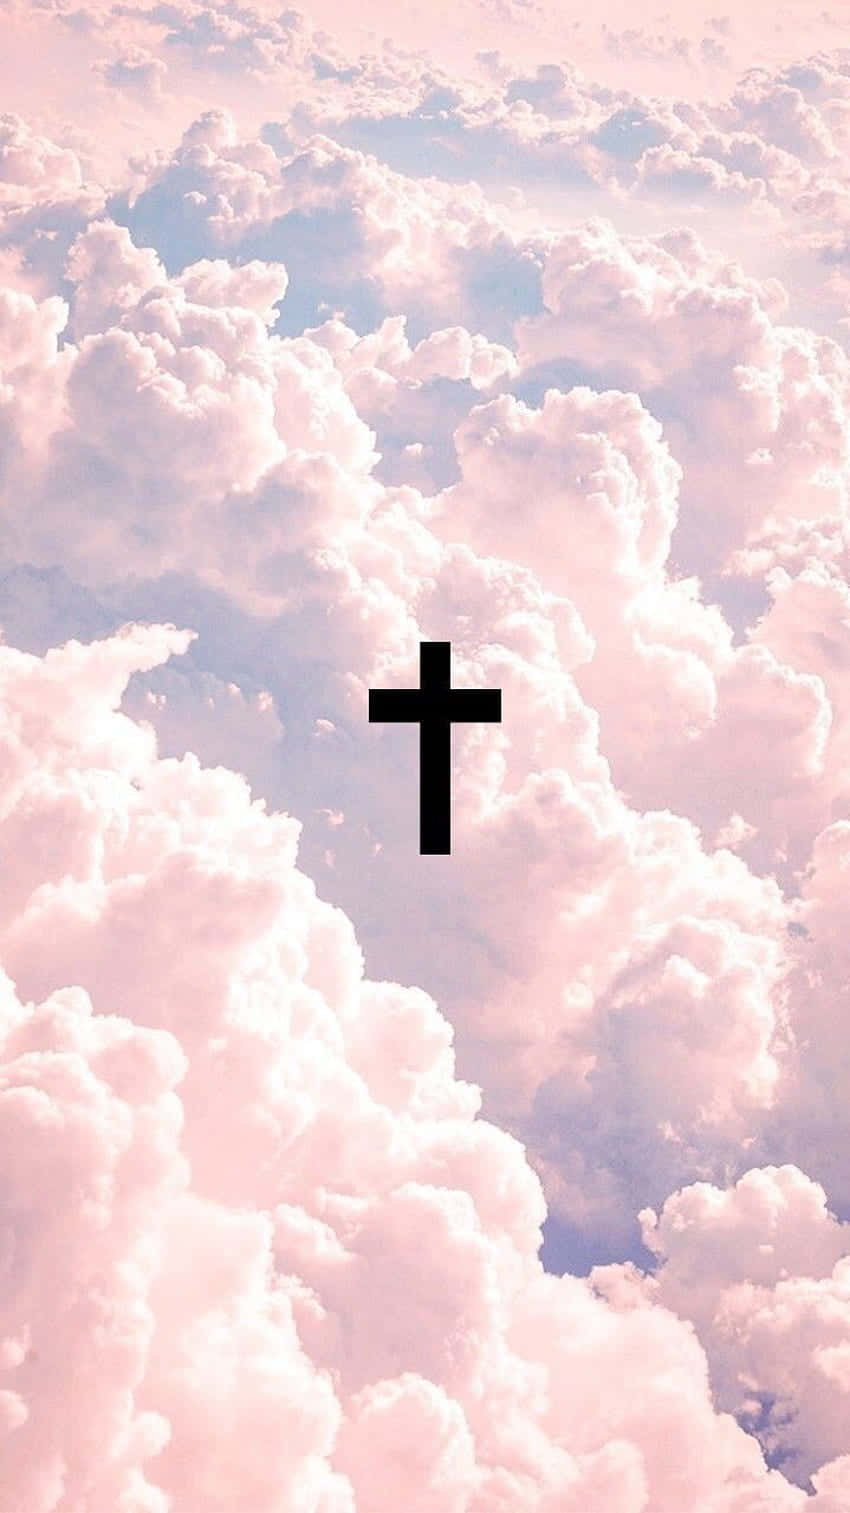 Spread the message of Jesus on your personal device. Wallpaper